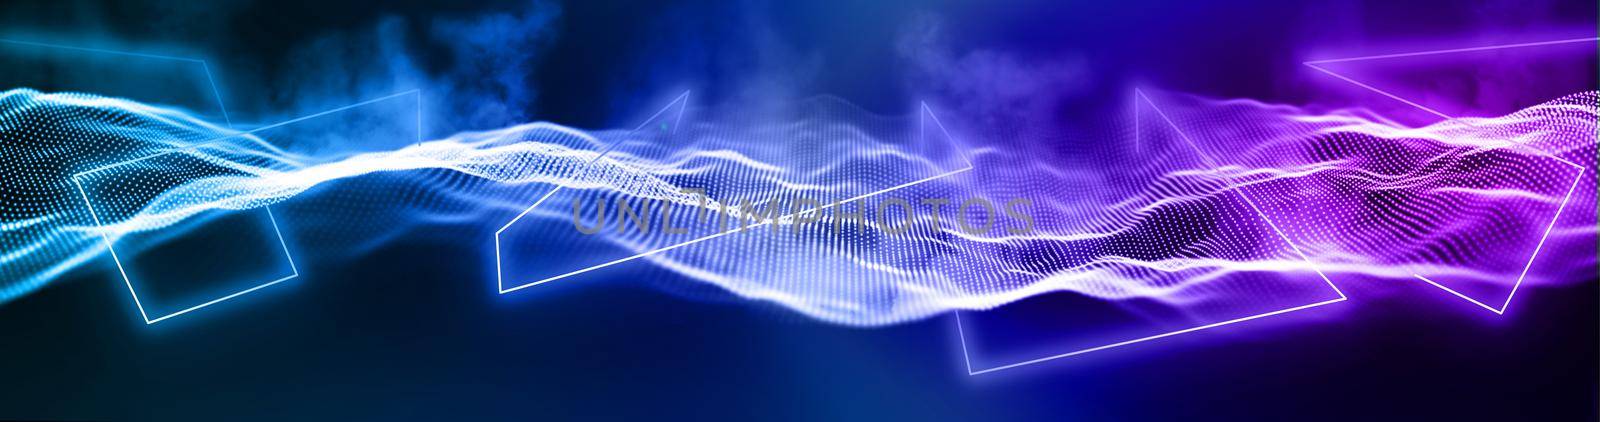 Music abstract Background Blue. Neon Retro wave background. Tecnology concept. by DmytroRazinkov